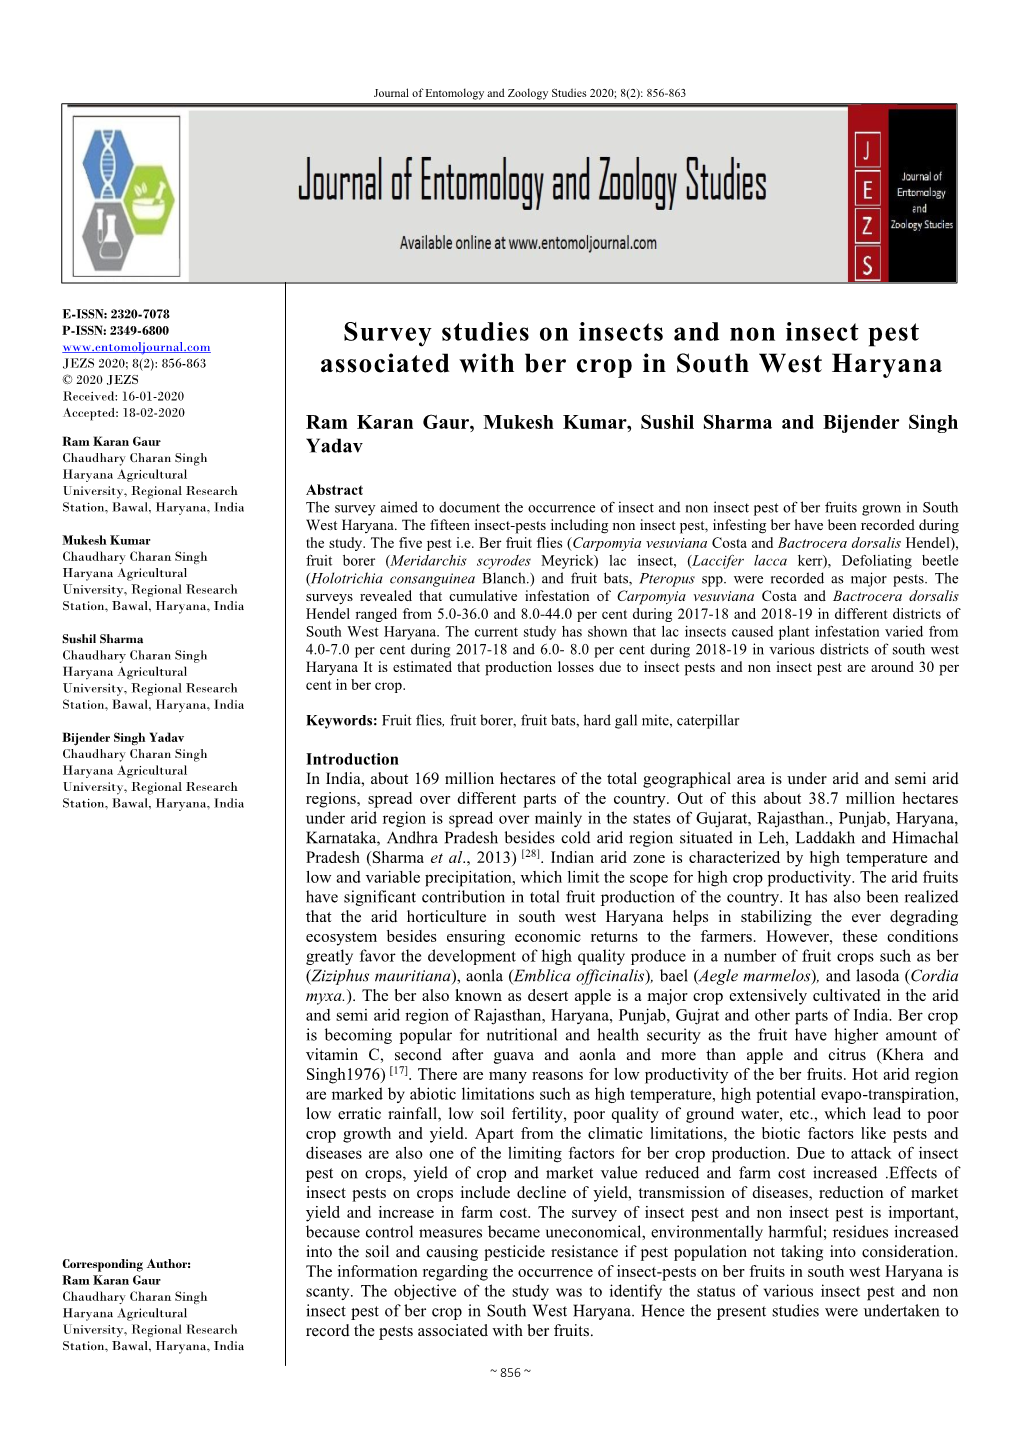 Survey Studies on Insects and Non Insect Pest Associated with Ber Crop in South West Haryana